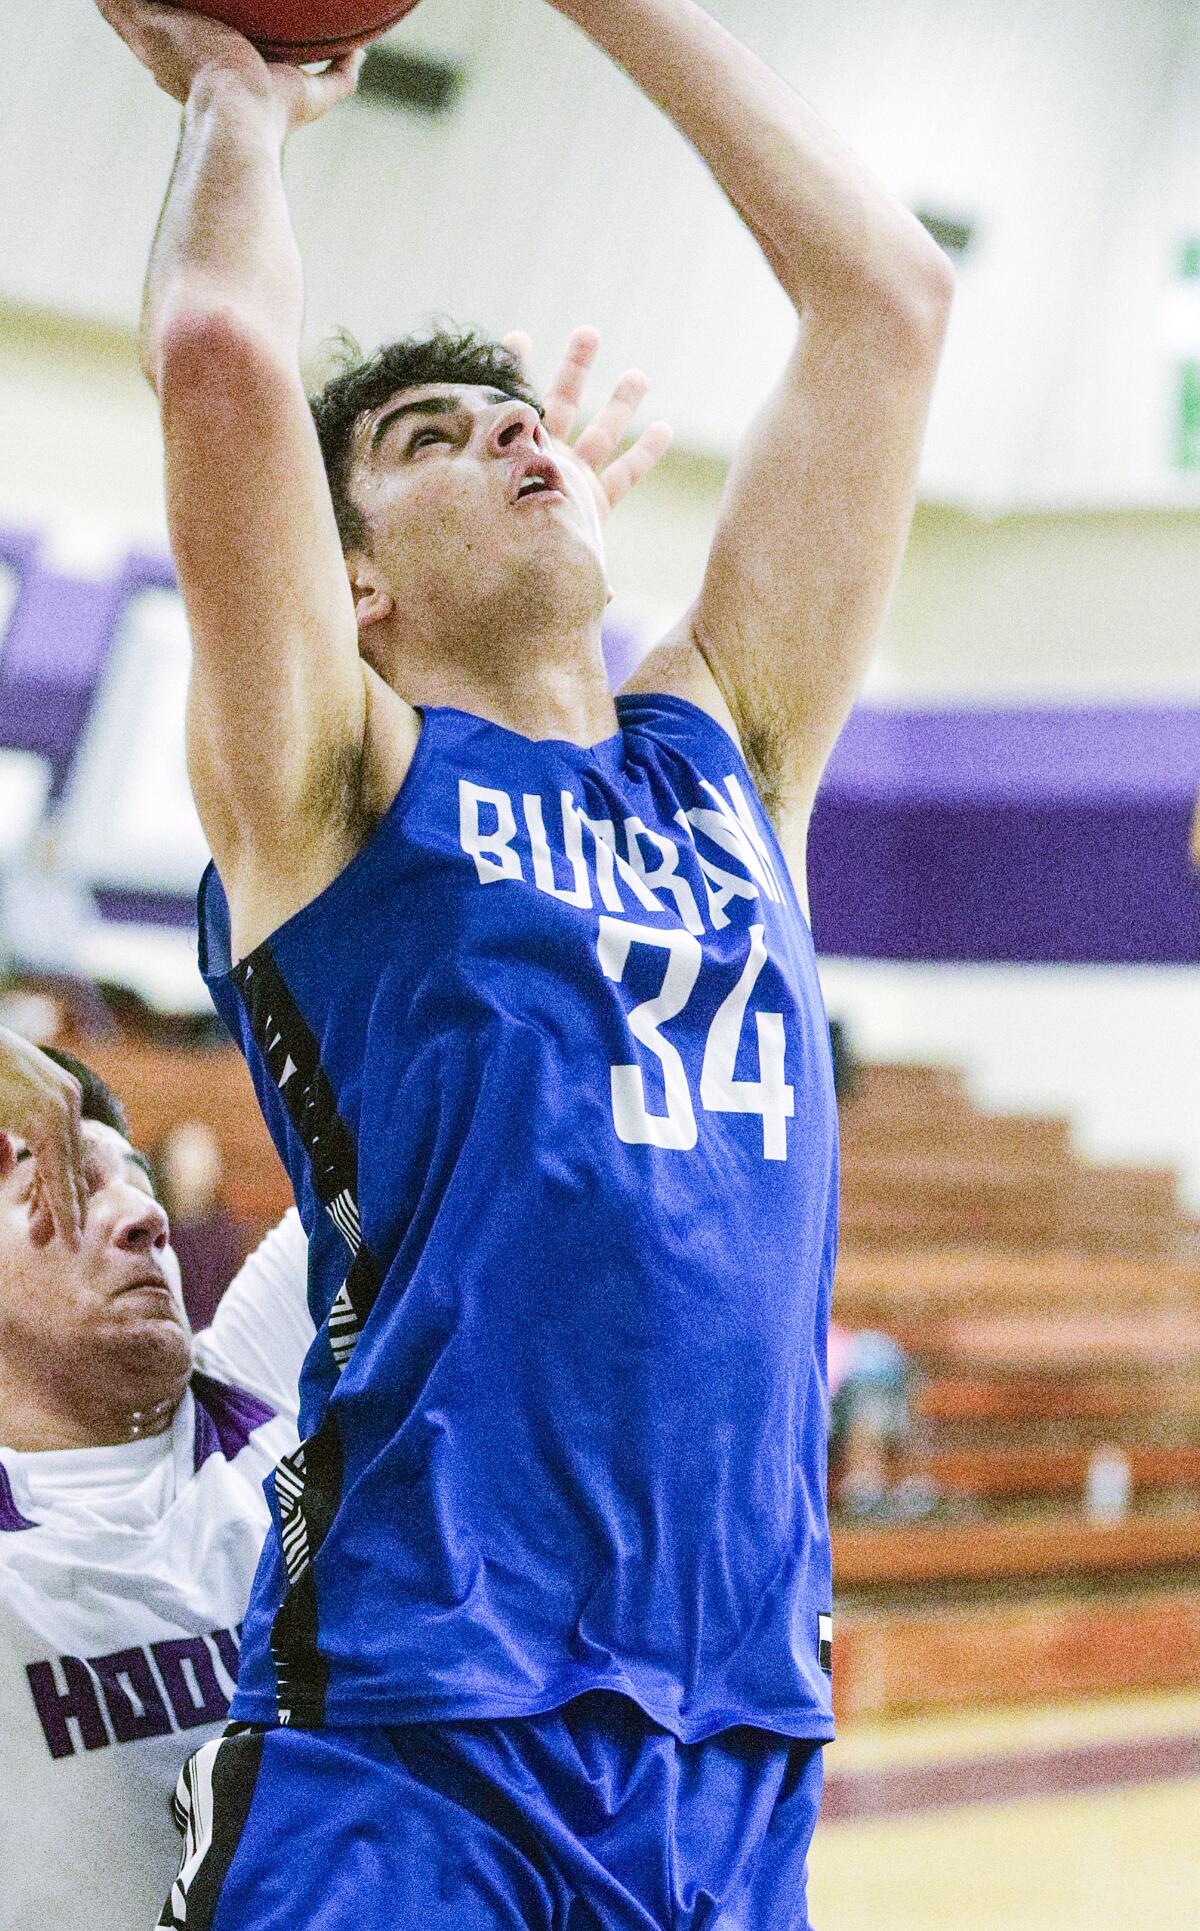 Burbank's Kevin Sarkes gets inside to shoot against Hoover in a Pacific League boys' basketball game at Hoover High School on Friday, January 3, 2020.